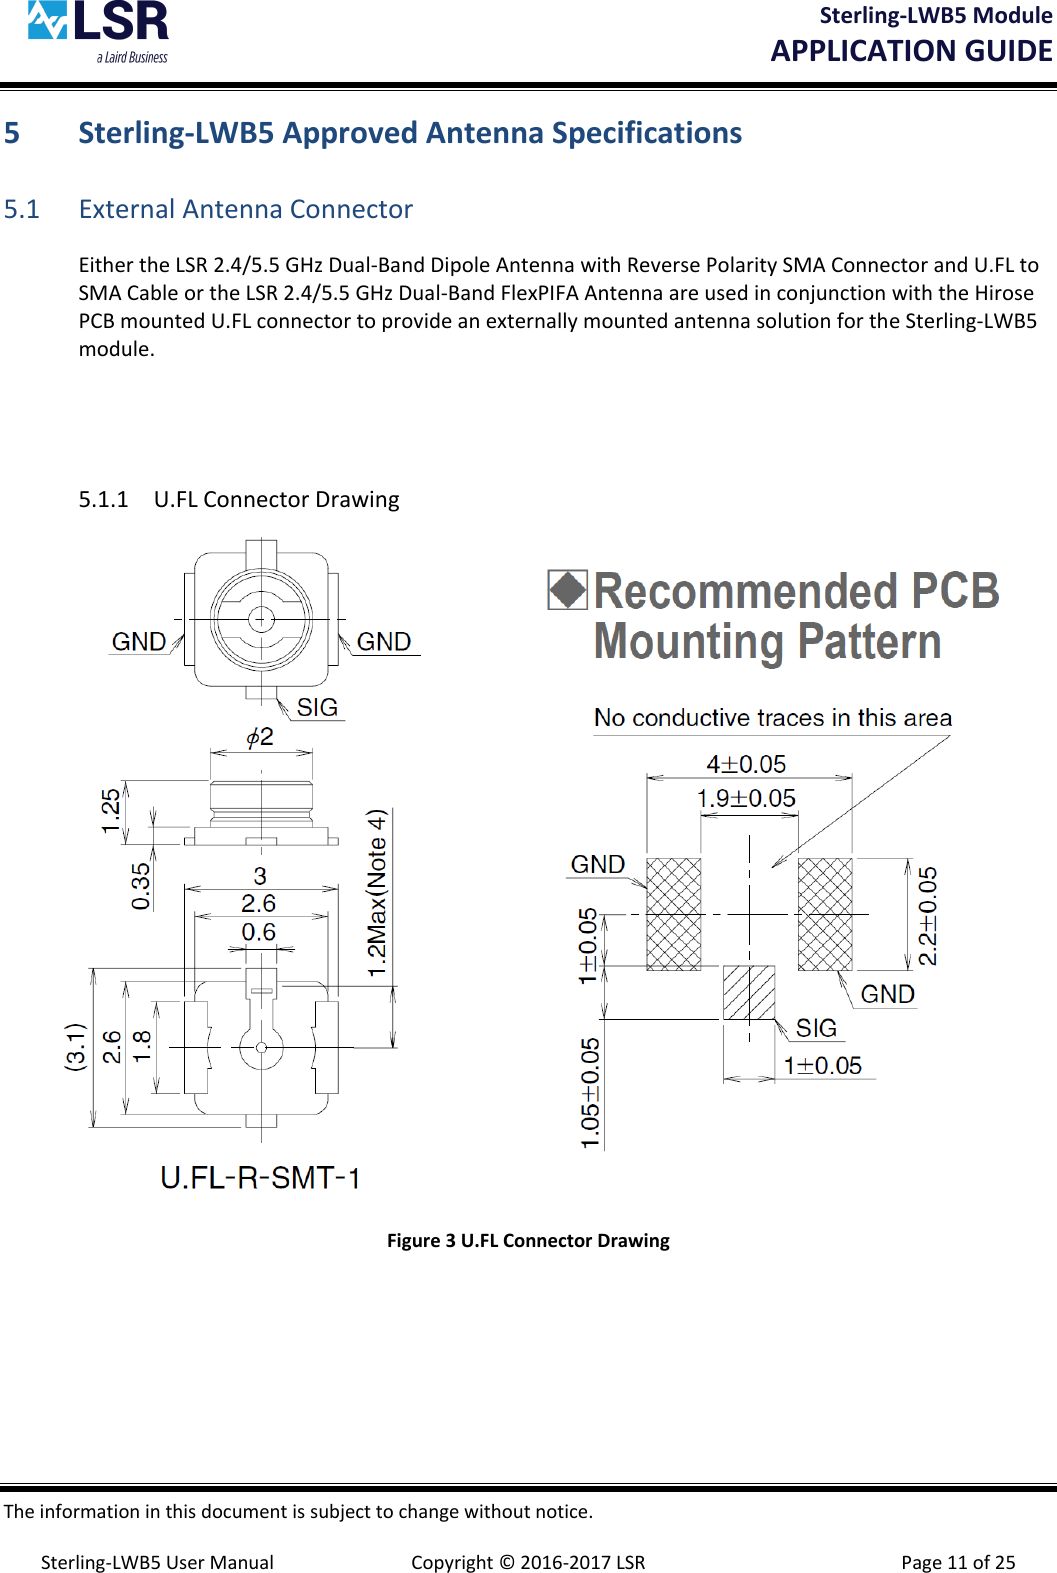 Sterling-LWB5 Module       APPLICATION GUIDE  The information in this document is subject to change without notice.  Sterling-LWB5 User Manual  Copyright © 2016-2017 LSR  Page 11 of 25 5 Sterling-LWB5 Approved Antenna Specifications 5.1 External Antenna Connector Either the LSR 2.4/5.5 GHz Dual-Band Dipole Antenna with Reverse Polarity SMA Connector and U.FL to SMA Cable or the LSR 2.4/5.5 GHz Dual-Band FlexPIFA Antenna are used in conjunction with the Hirose PCB mounted U.FL connector to provide an externally mounted antenna solution for the Sterling-LWB5 module.   5.1.1 U.FL Connector Drawing  Figure 3 U.FL Connector Drawing    